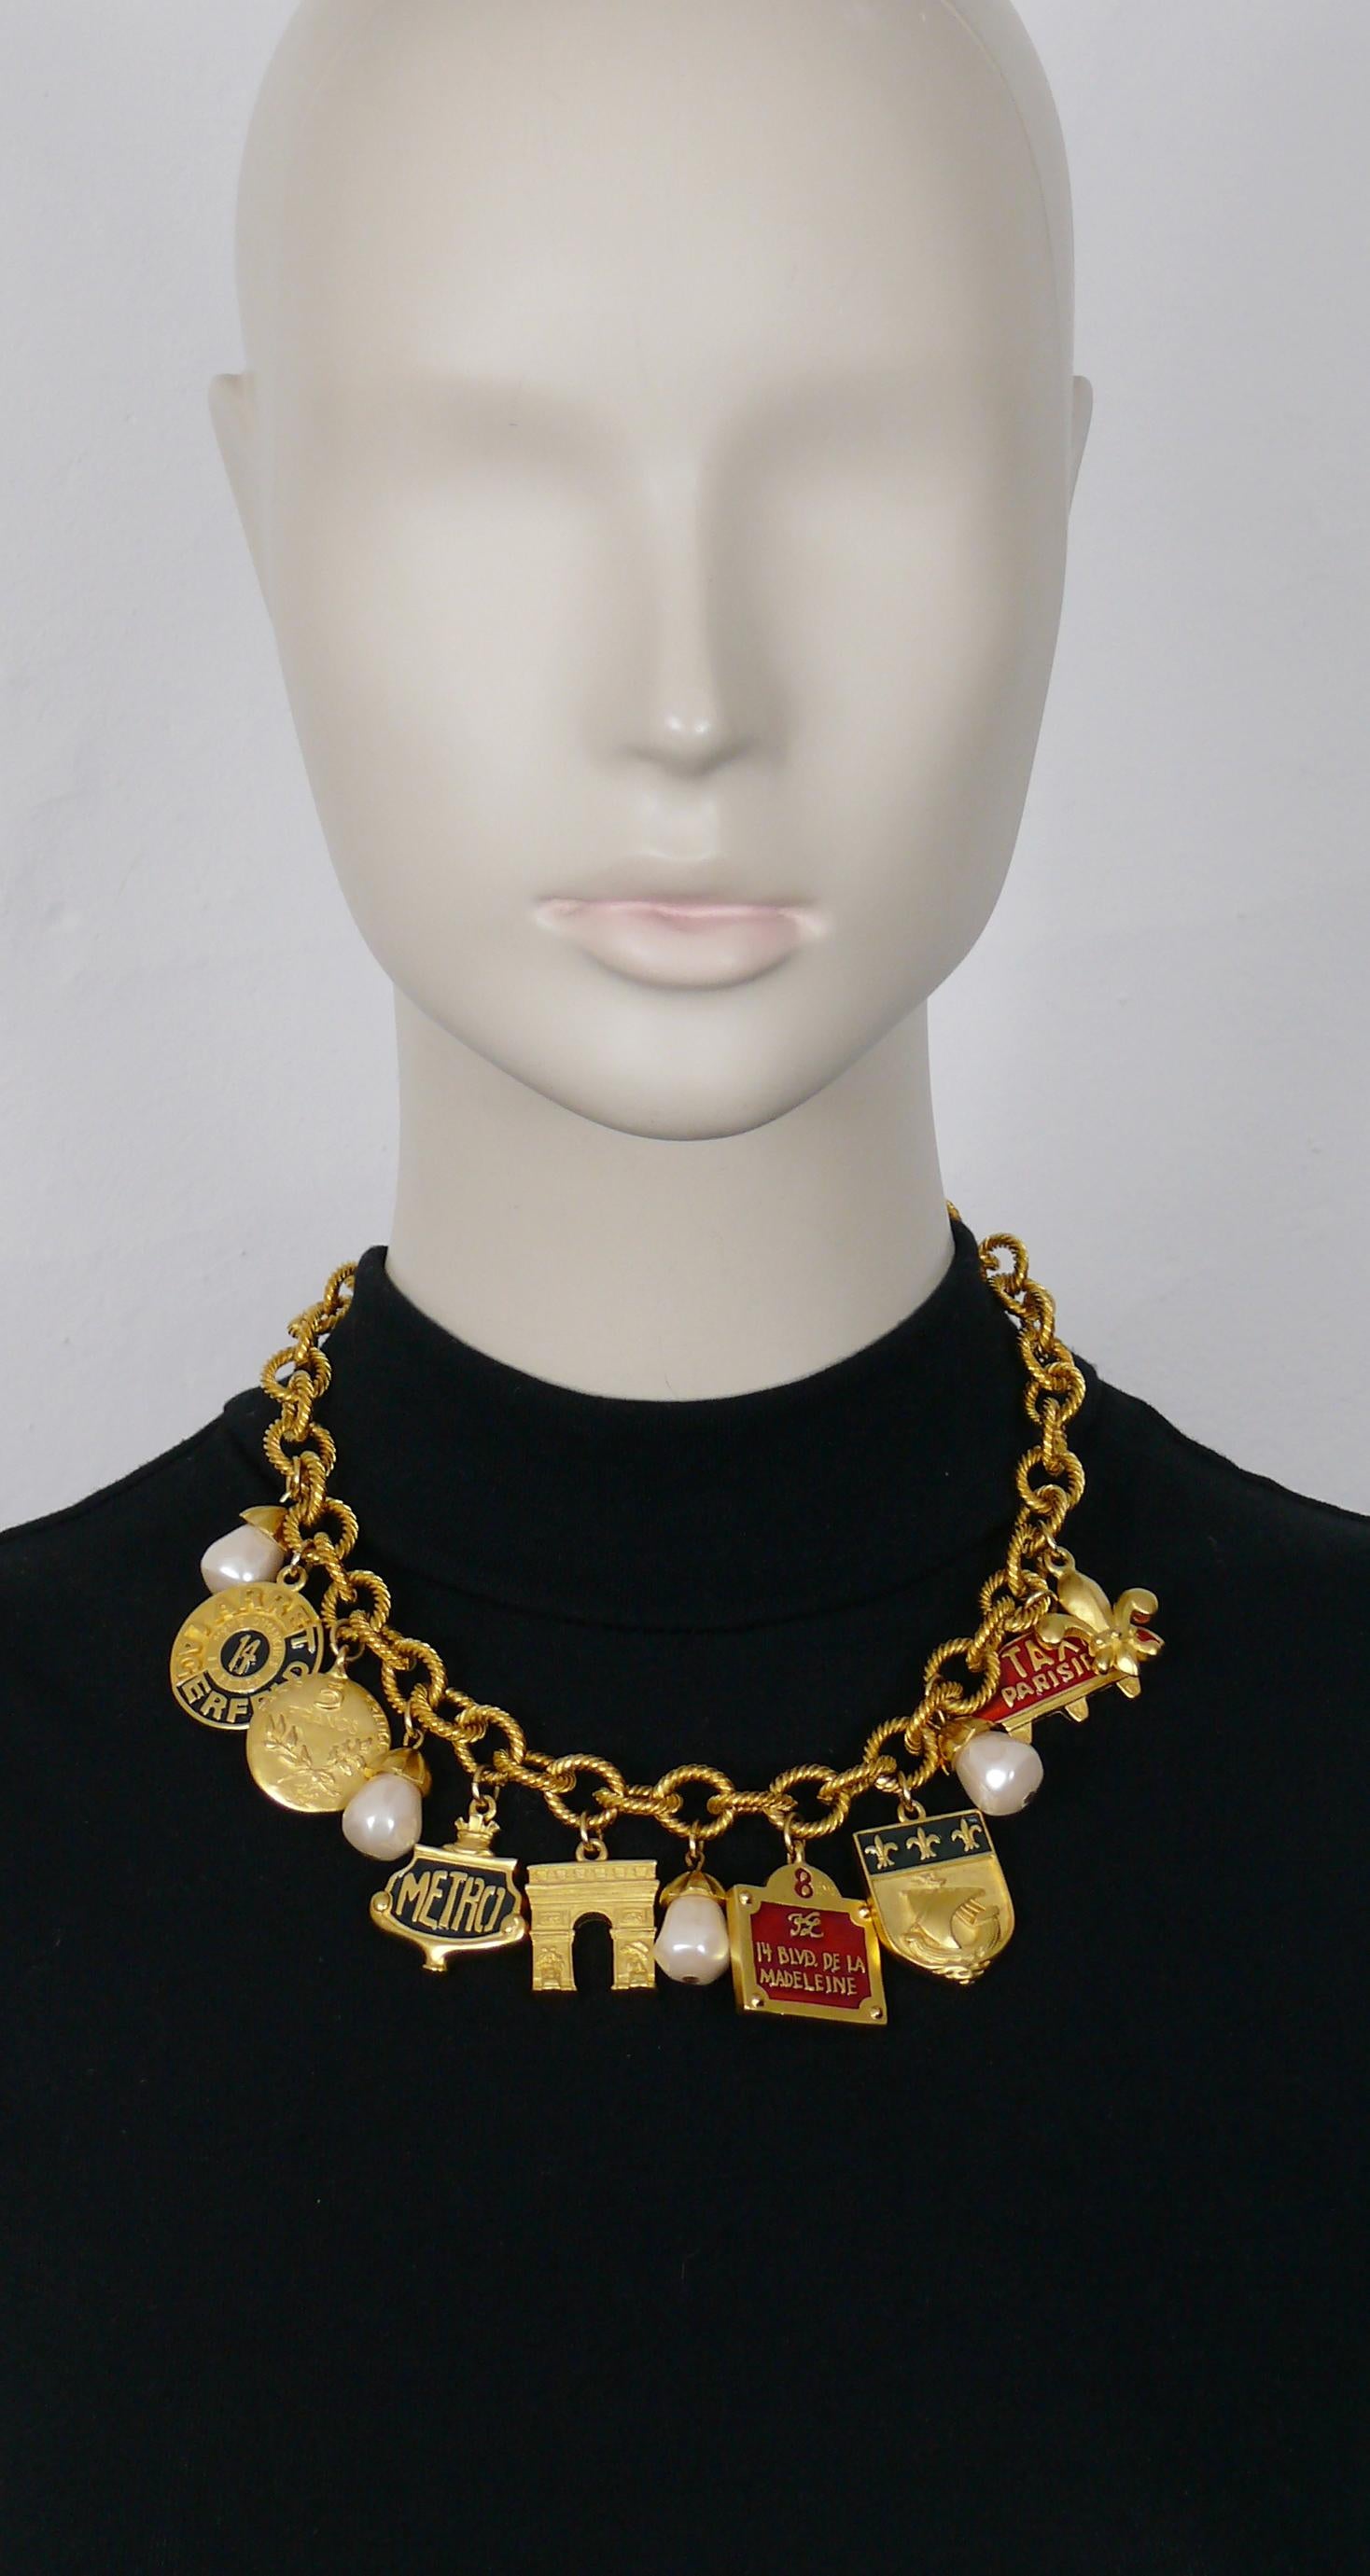 KARL LAGERFELD vintage gold tone chain necklace featuring Paris tribute charms and faux pearls (resin).

Adjustable lobster clasp closure.

Marked KL.

Indicative measurements : adjustable length from approx. 43 cm (16.93 inches) to approx. 48 cm